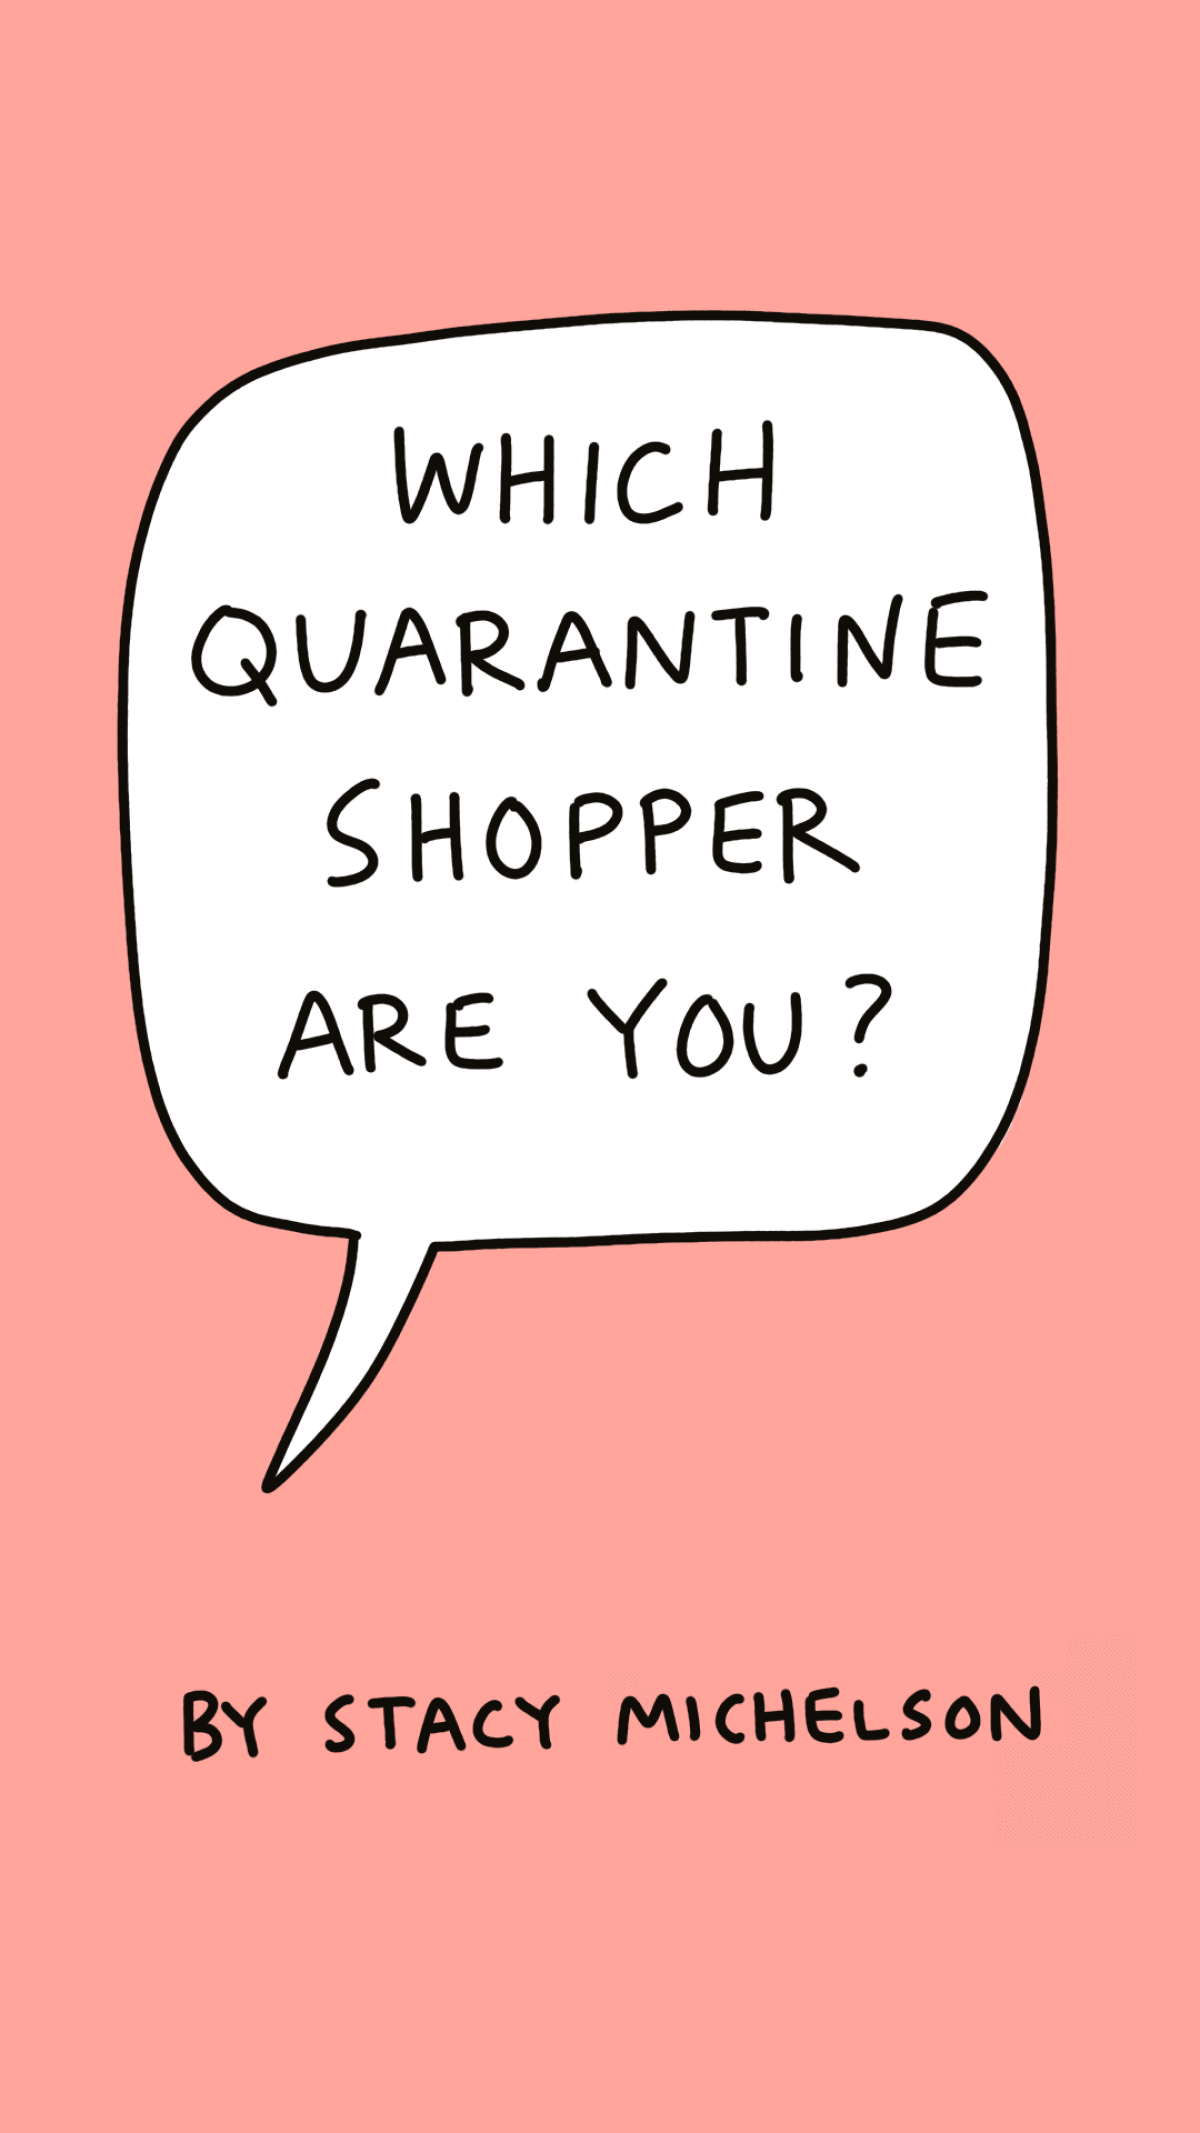 Which quarantine shopper are you?, a comic by Stacy Michelson.